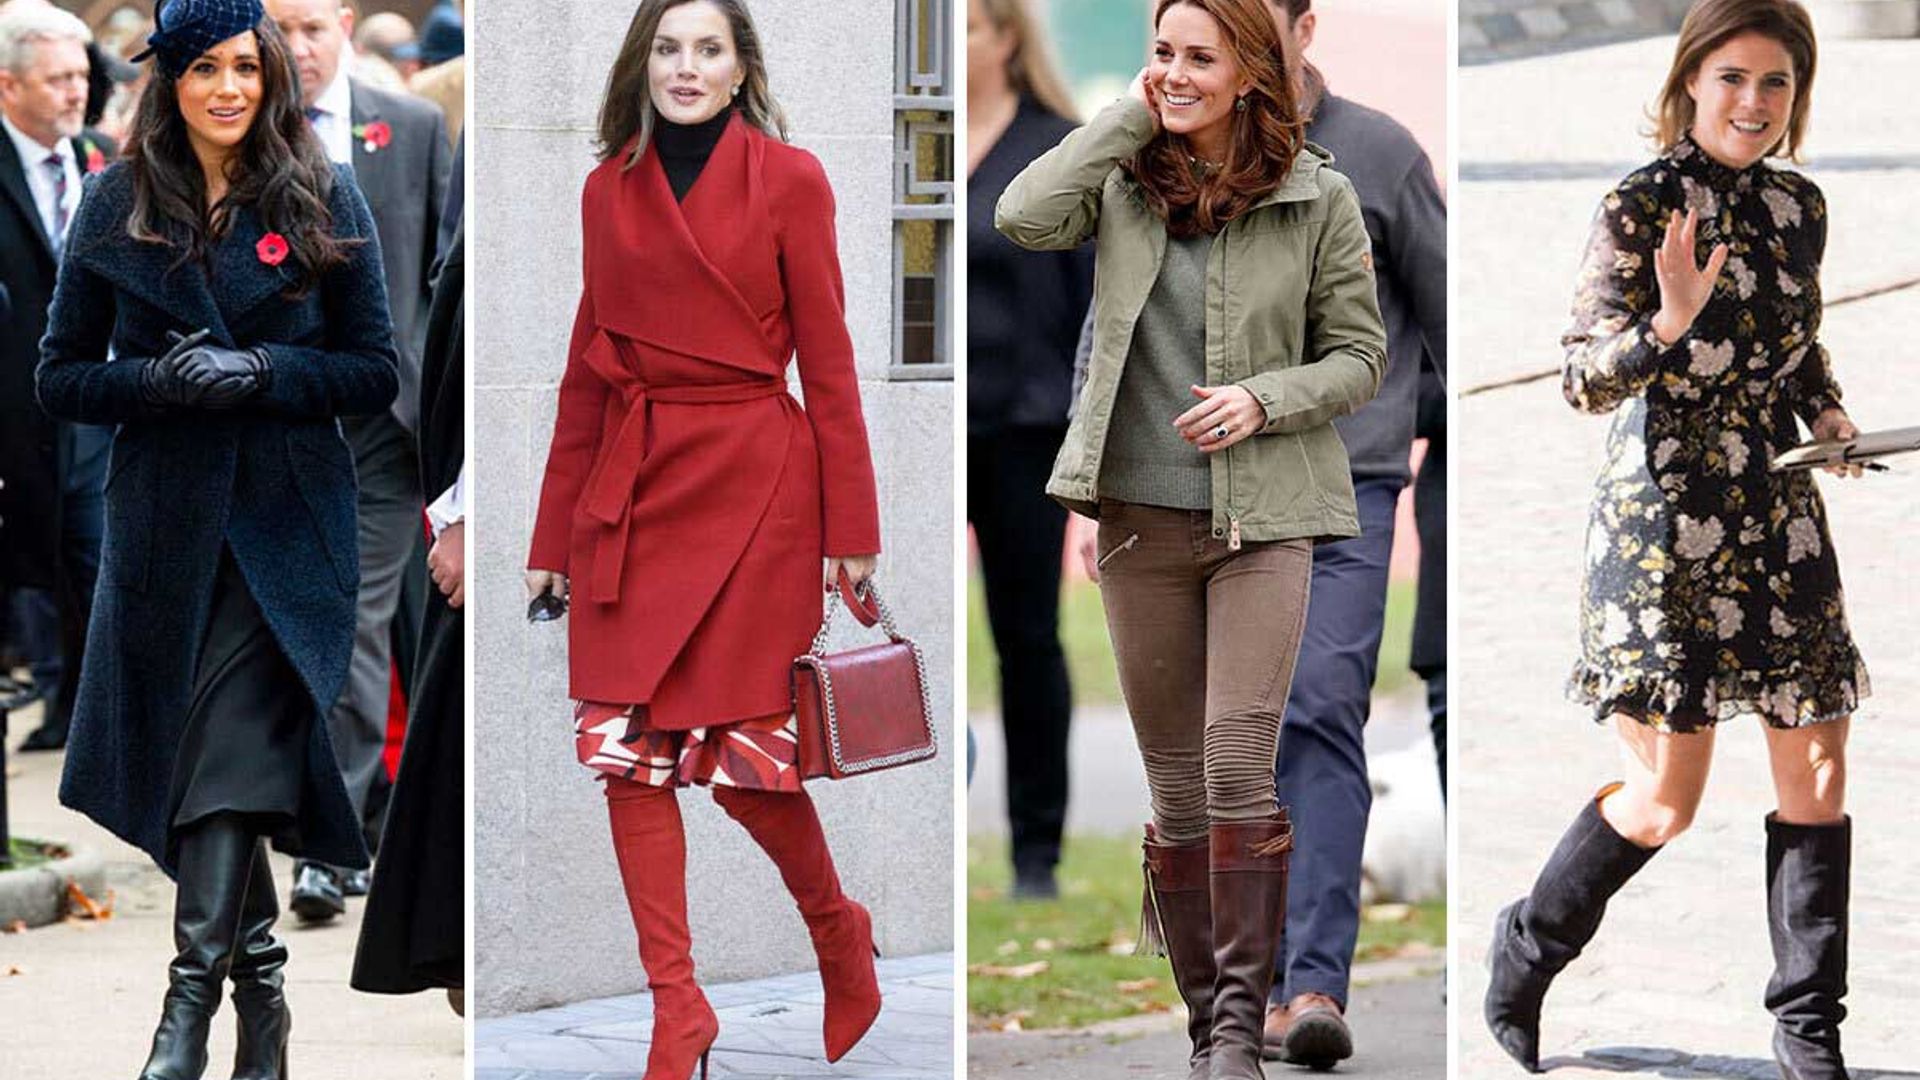 The knee-high boots fit for royalty - including Kate Middleton's